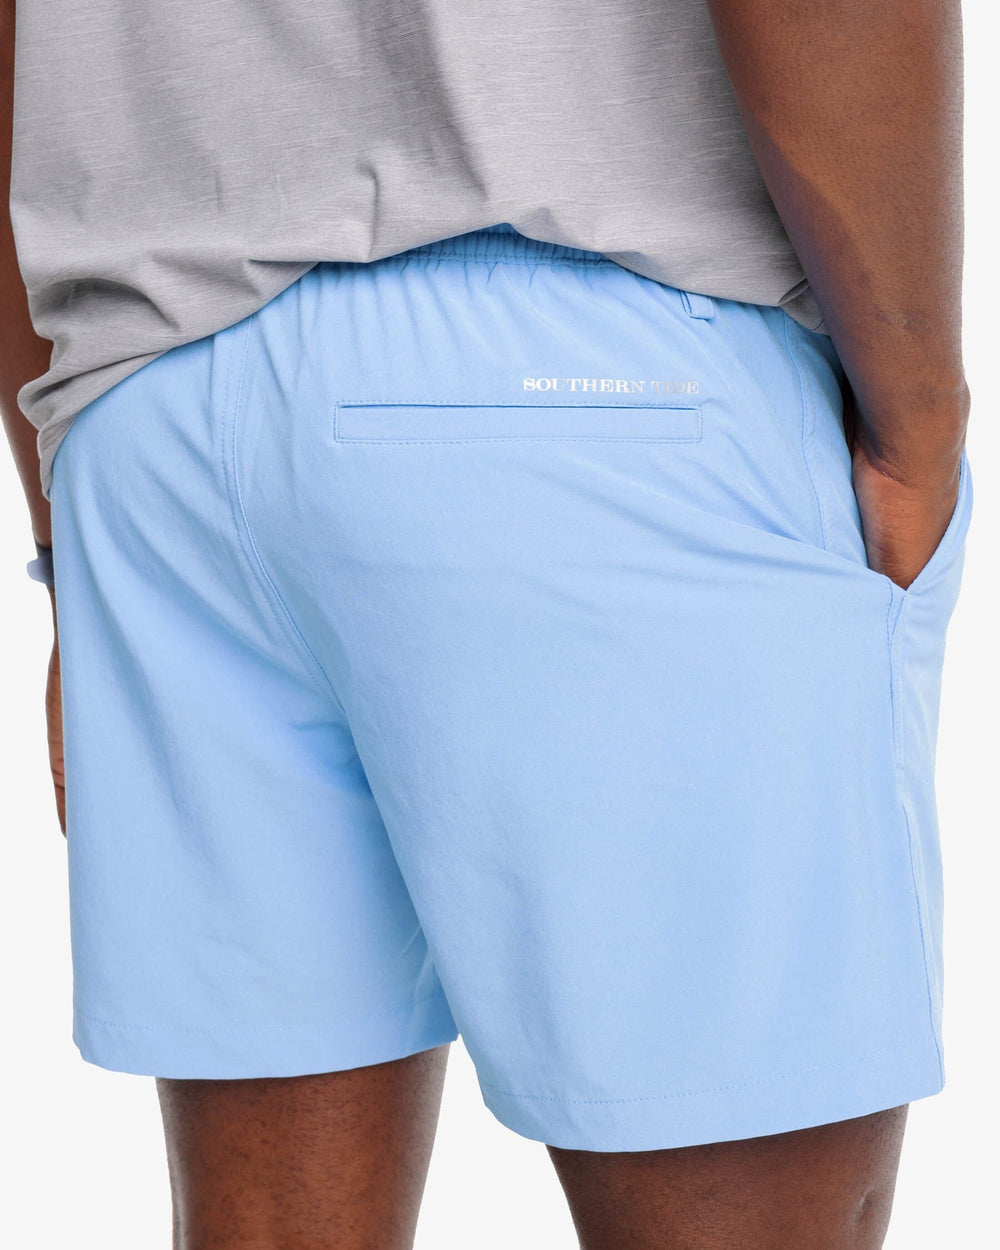 The model detail view of the Men's Rip Channel 6 Inch Performance Short by Southern Tide - Boat Blue